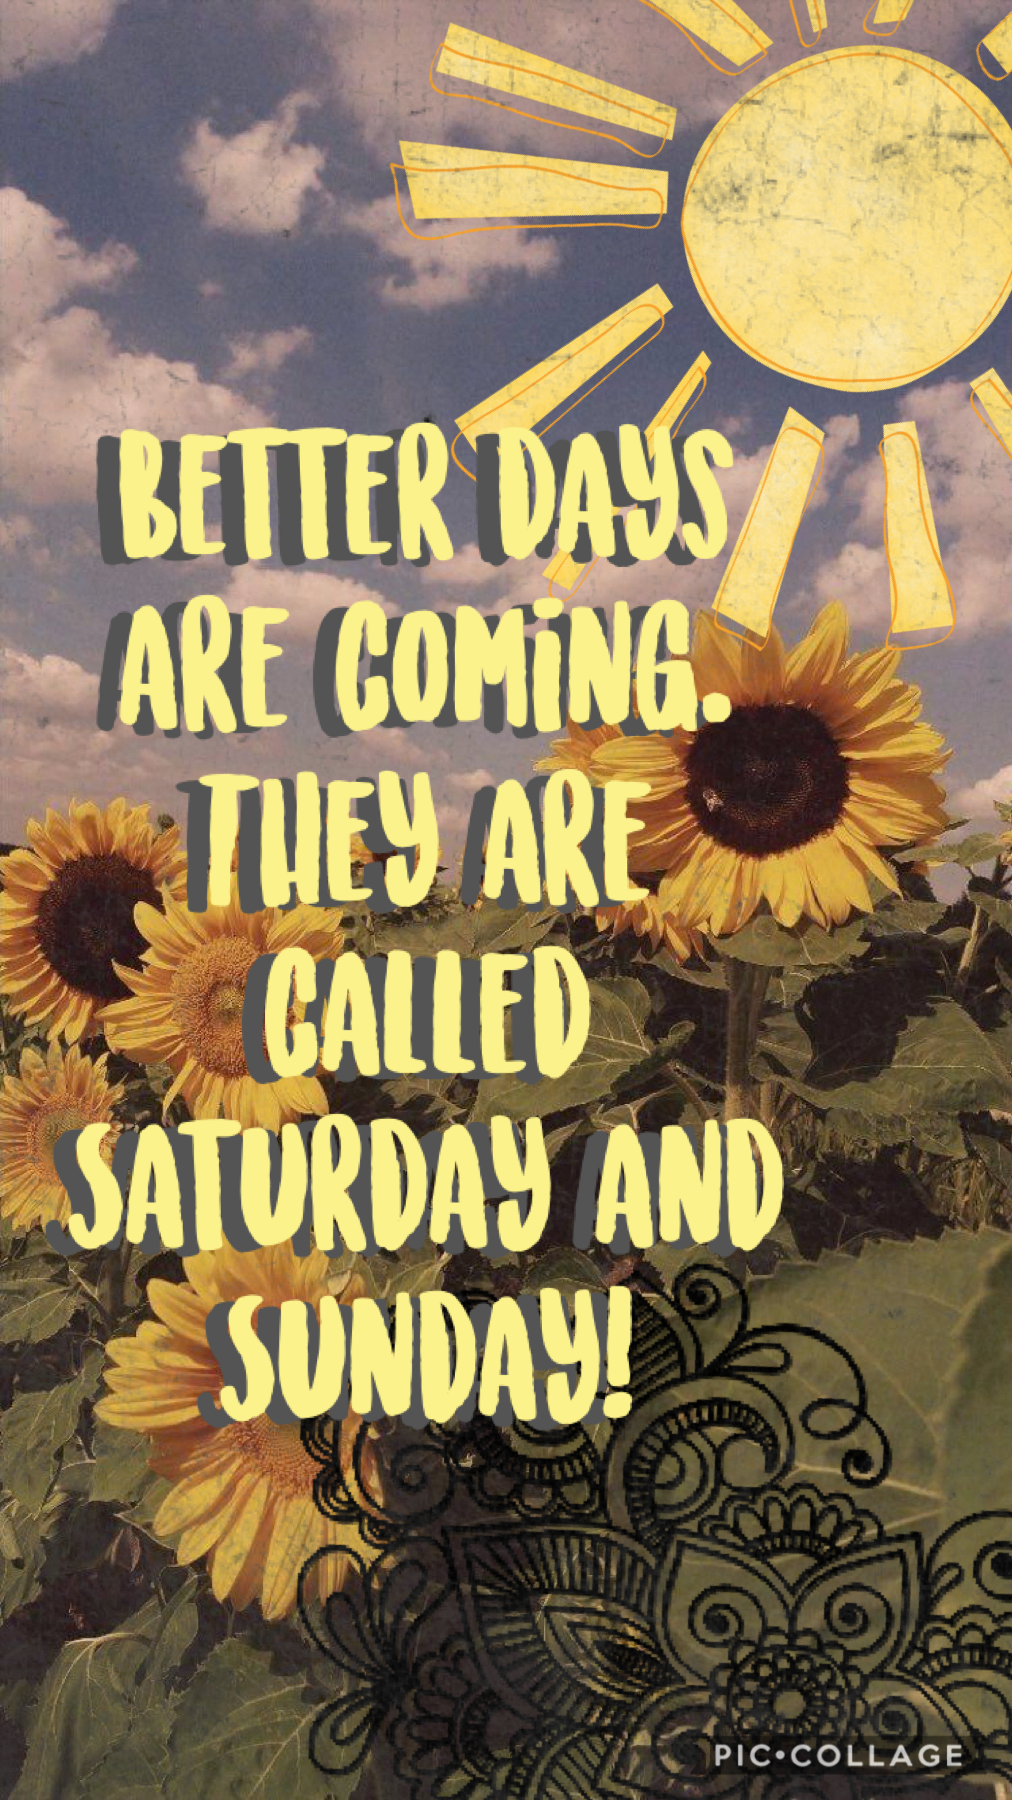 🌻Tap🌻
Happy weekend everyone!
Sorry I haven’t been posting for a while! I’ve been keeping busy going on bike rides with my friends! 
Hope your all well and

Happy day/night! ☀️🌙